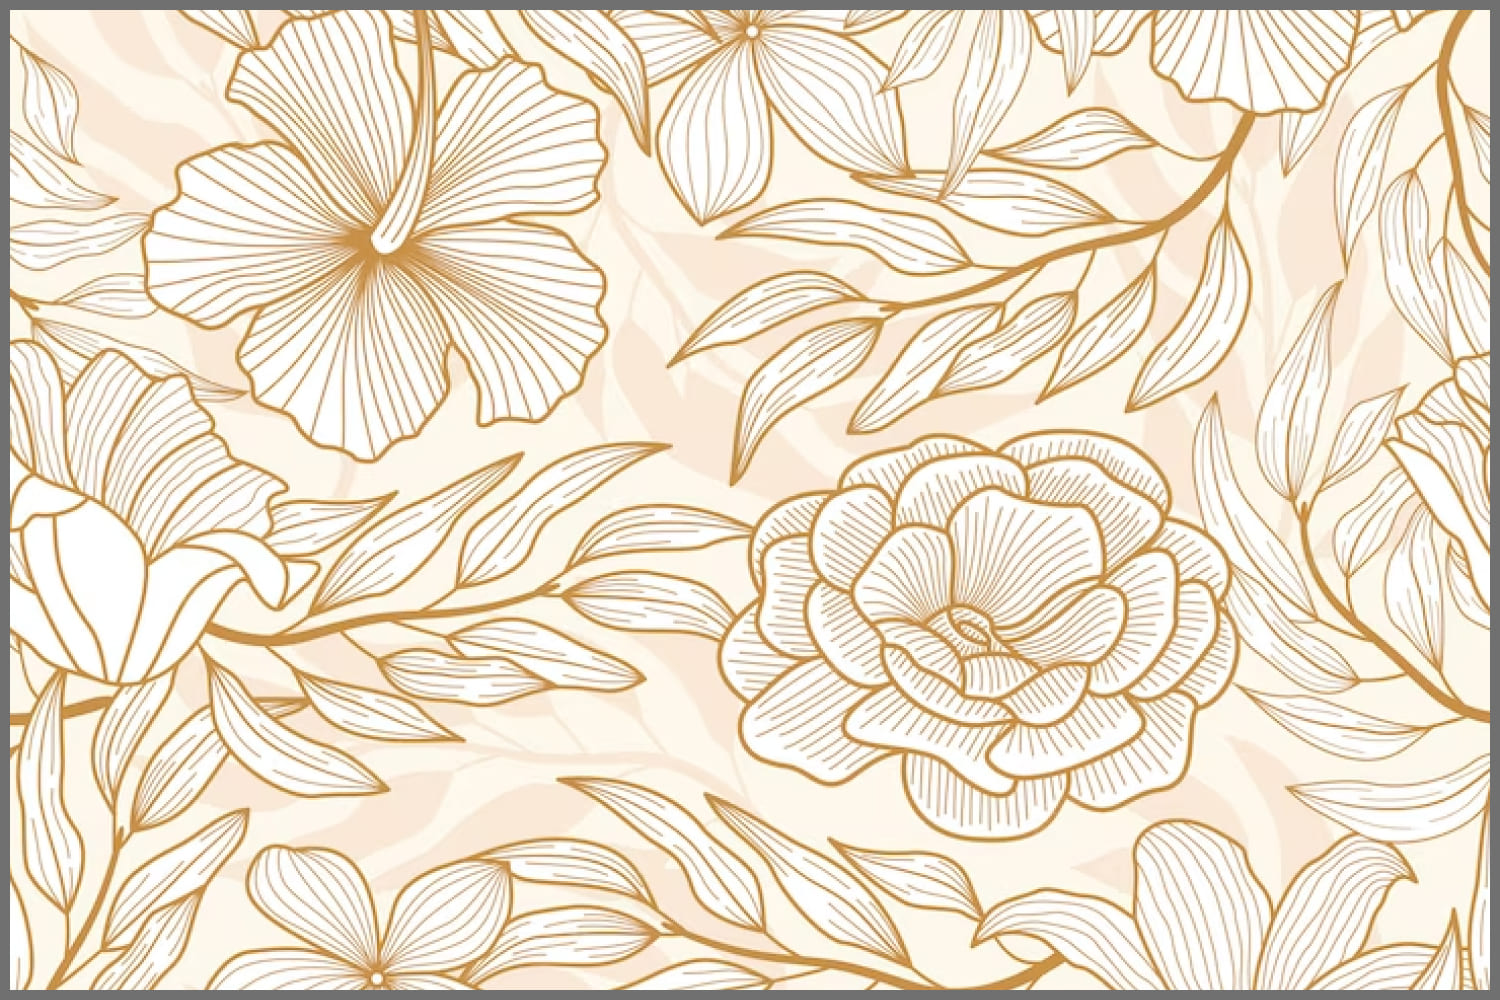 Colorful Vibrant Ditsy Floral  Free Vector Arts & Images - WowPatterns